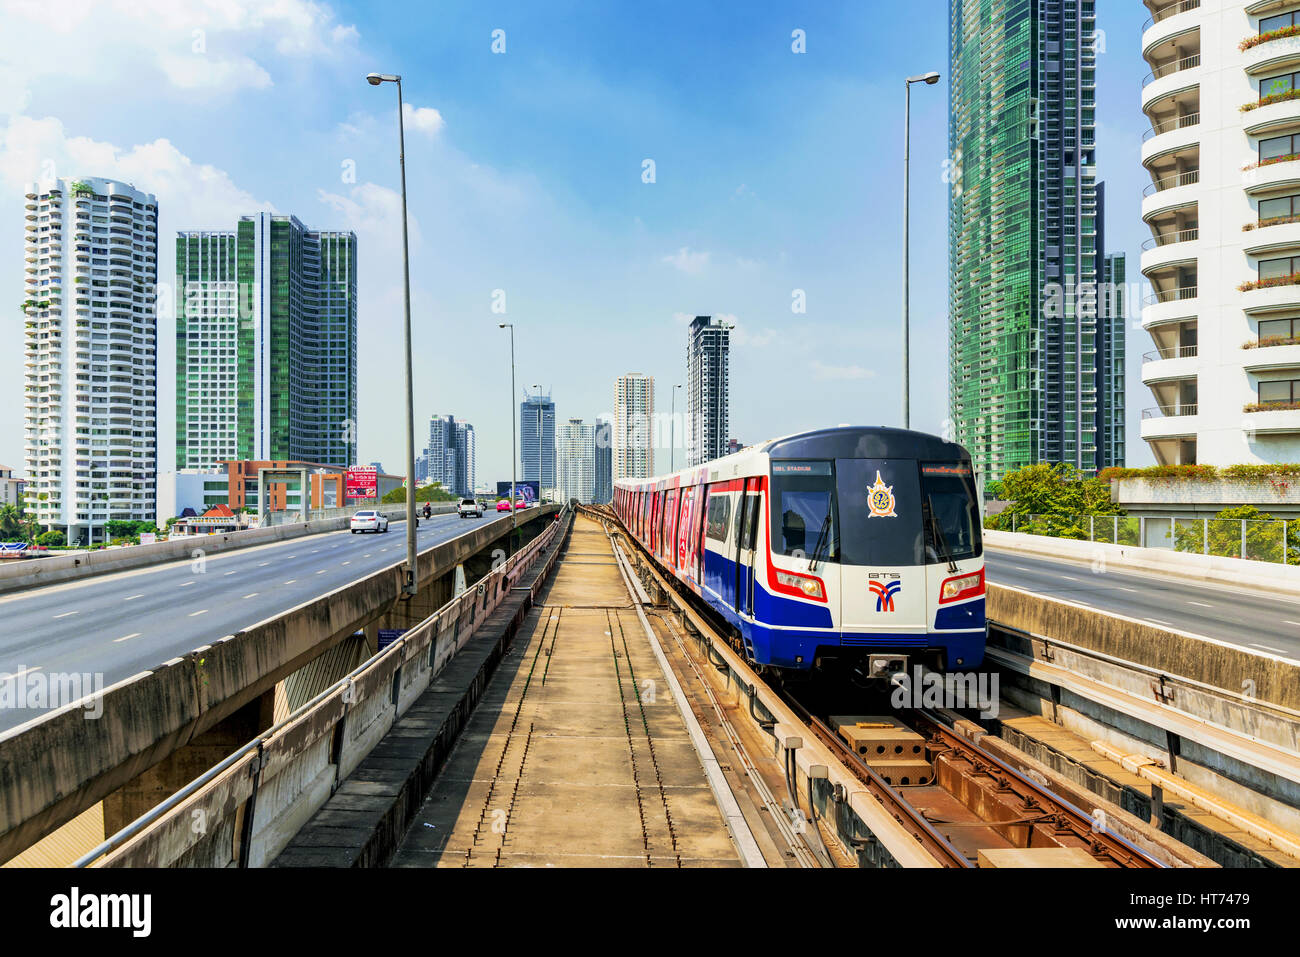 BANGKOK, THAILAND - JANUARY 30: BTS Sky train arriving at Saphan Taksin station on Taksin bridge with city architecture in the background on January 3 Stock Photo